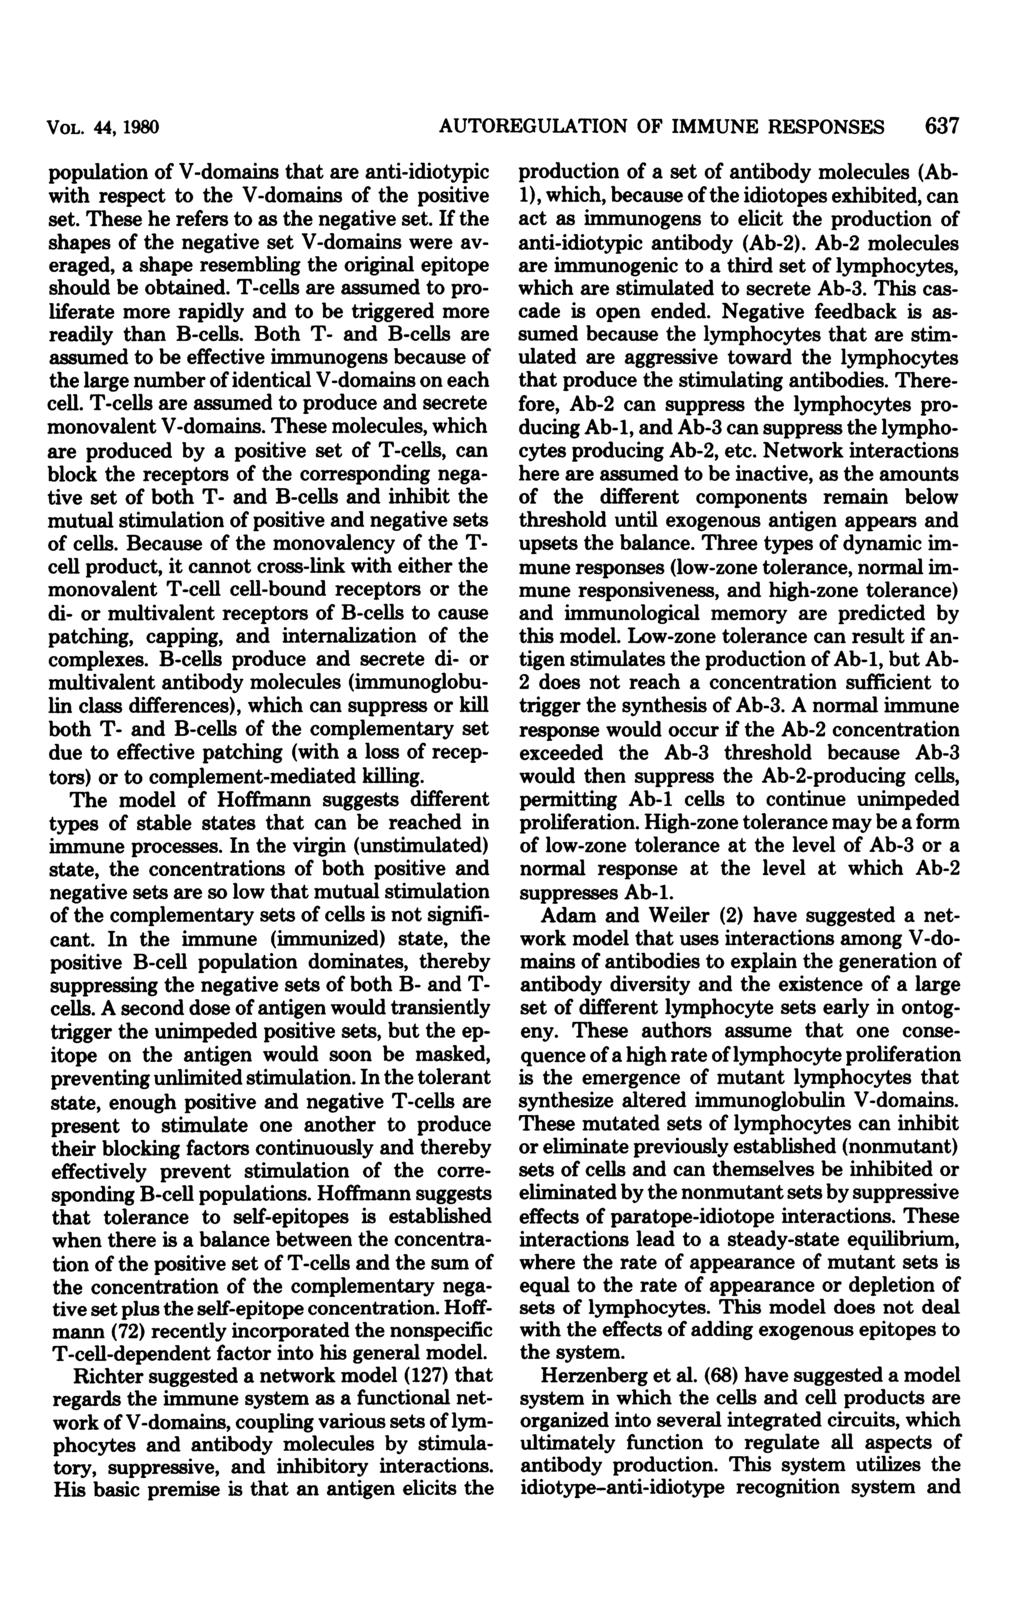 VOL. 44, 1980 population of V-domains that are anti-idiotypic with respect to the V-domains of the positive set. These he refers to as the negative set.